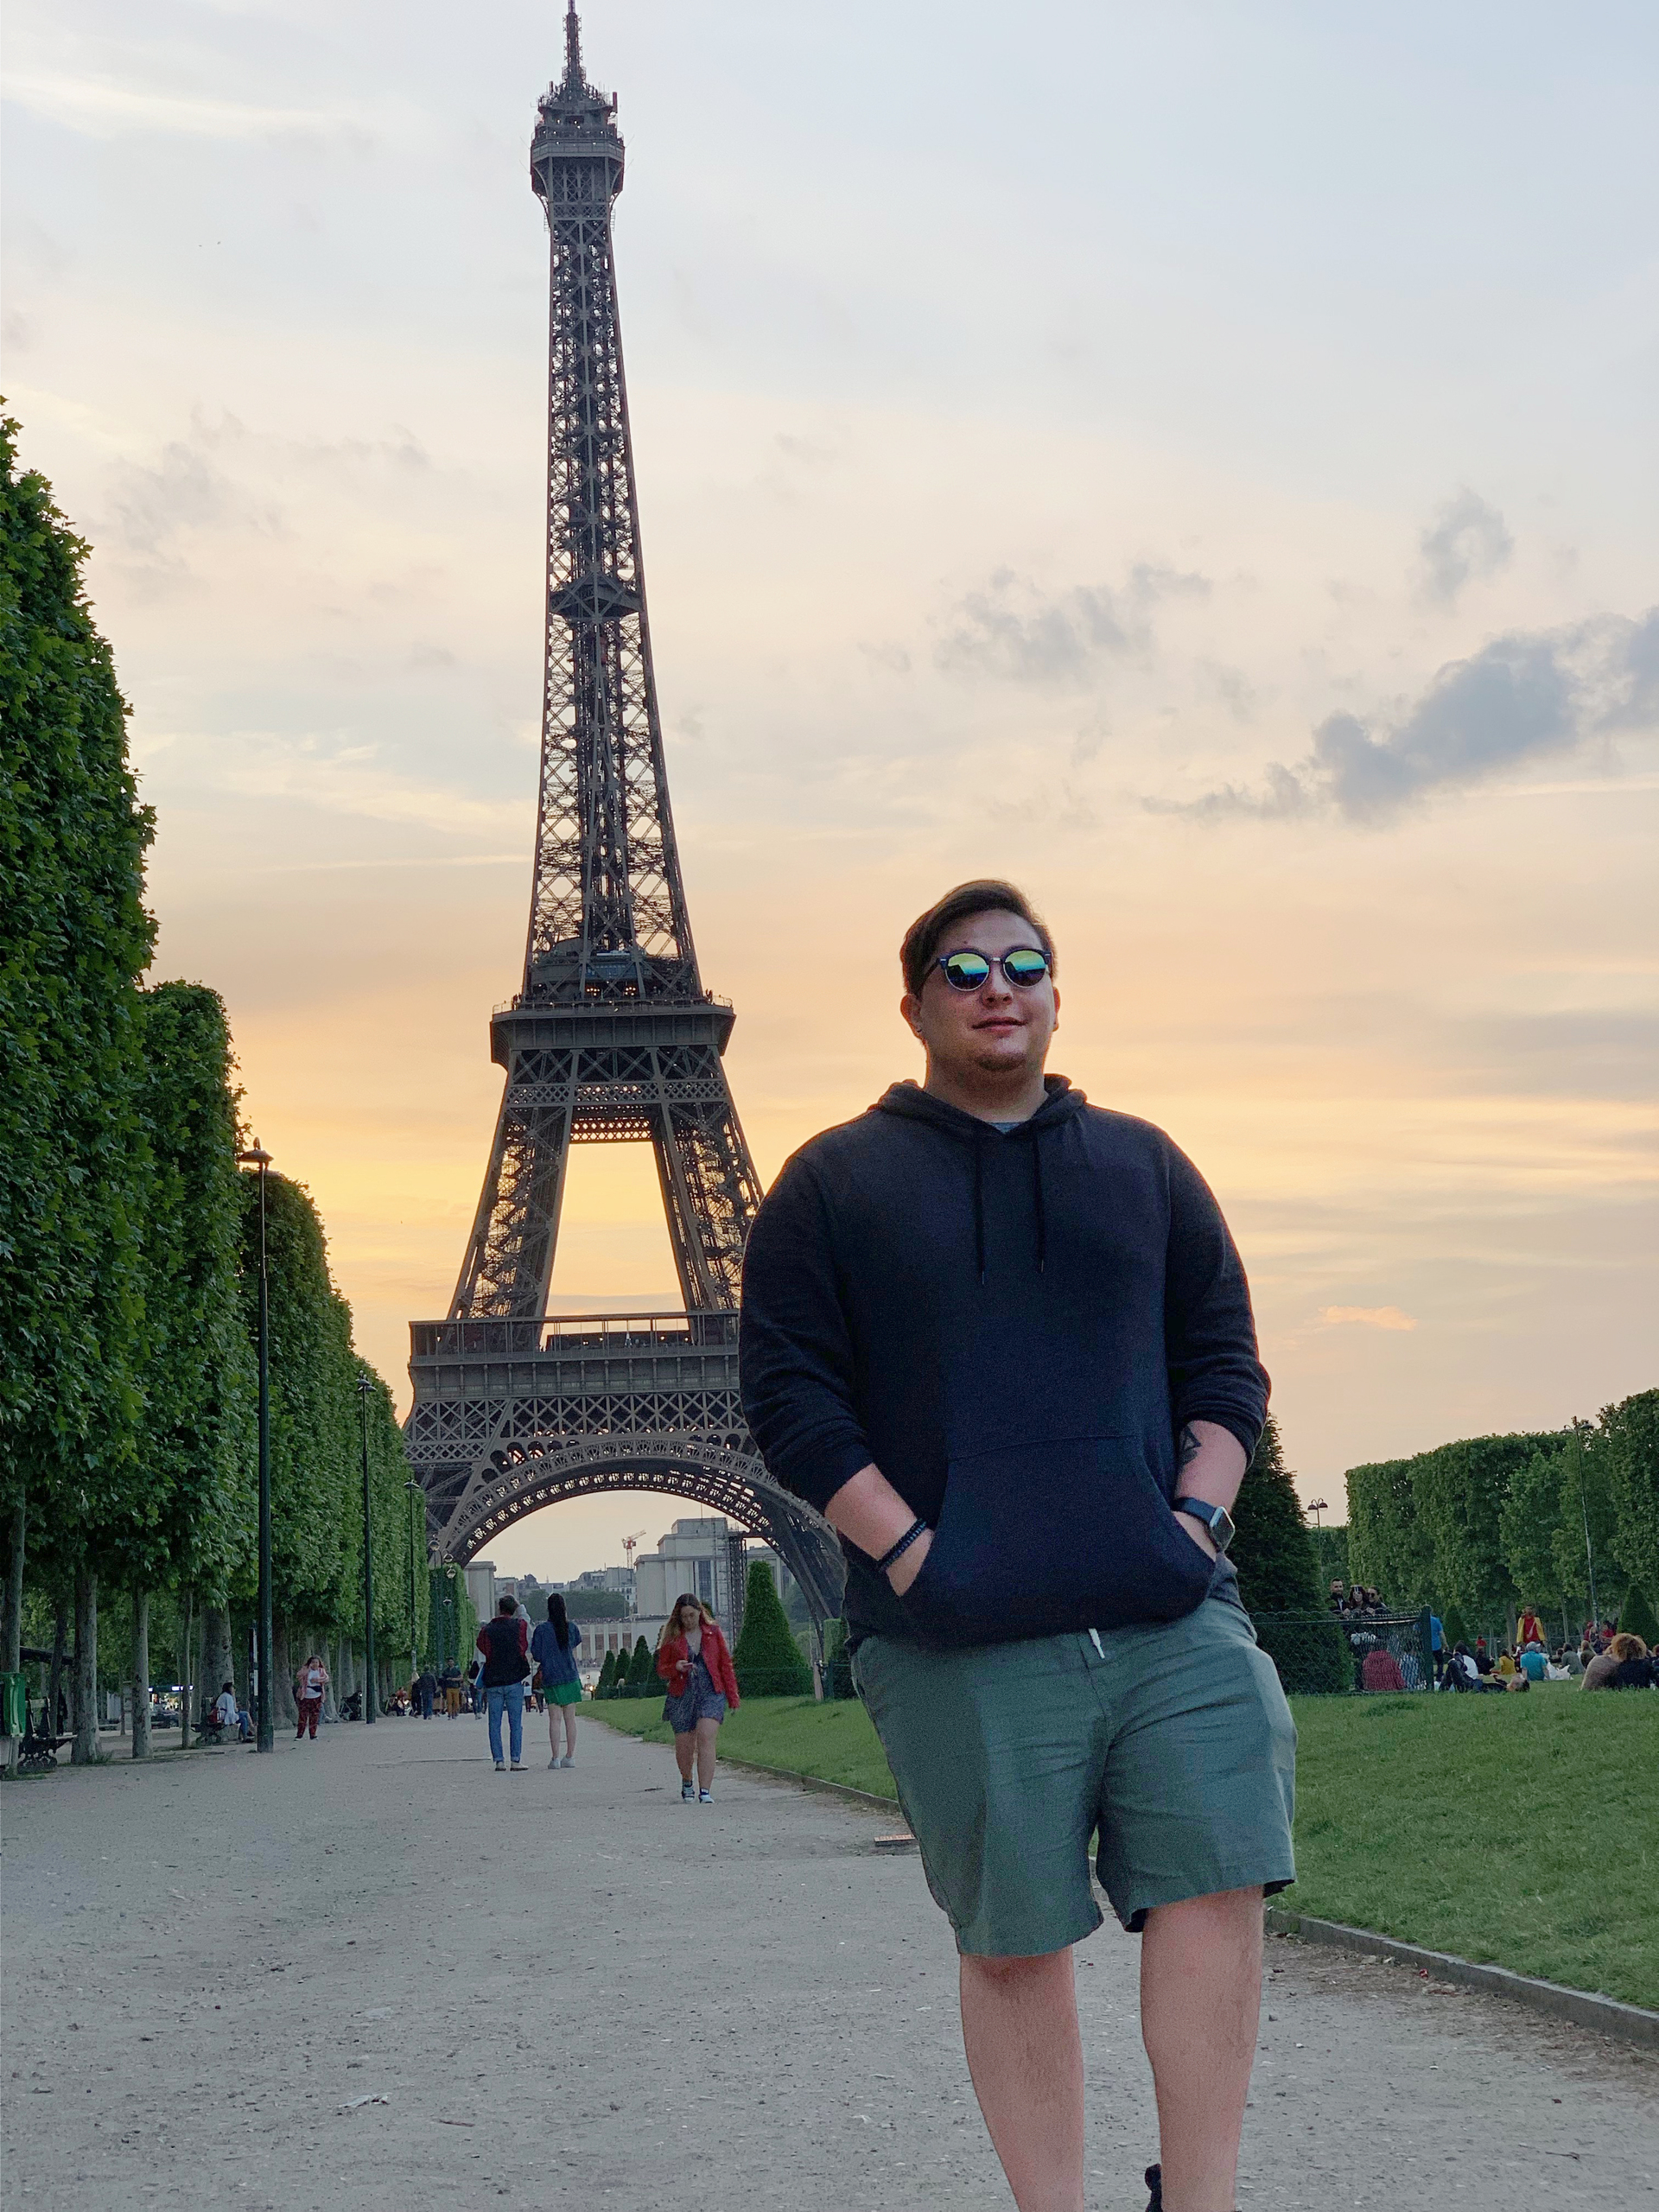 Morales in front of the Eiffel Tower.